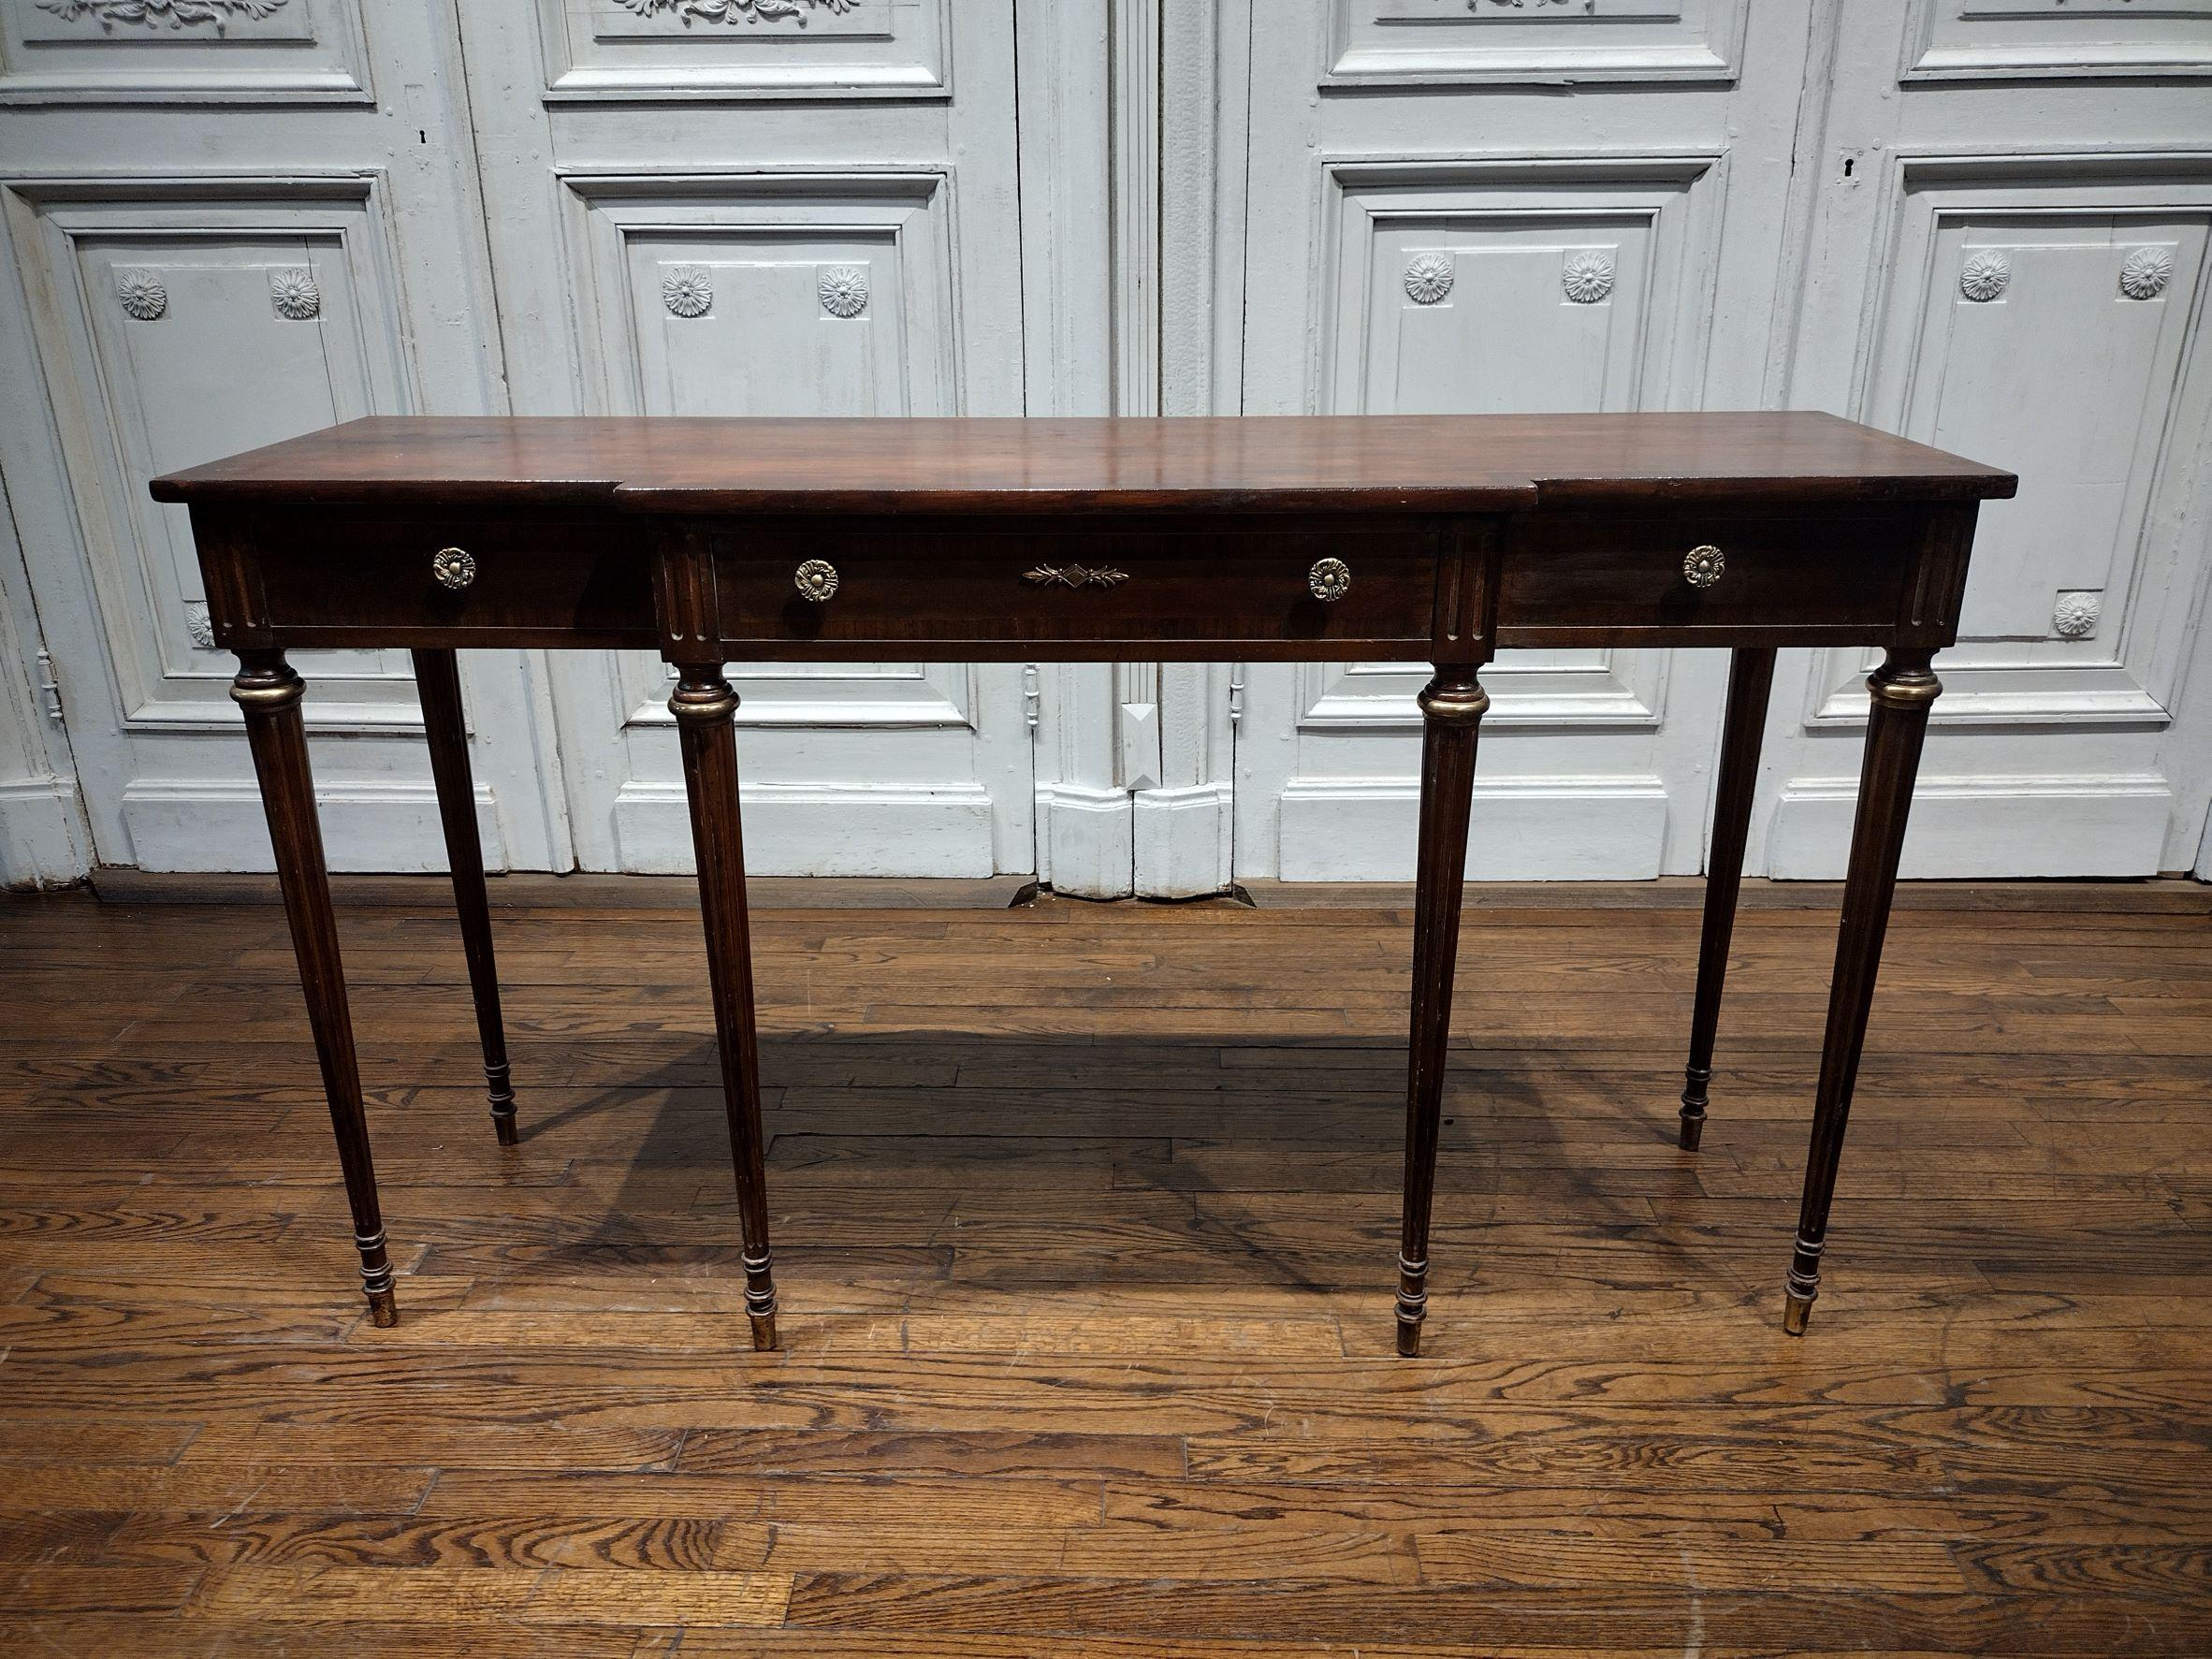 early-20th-century-console-table-4096 copy 2